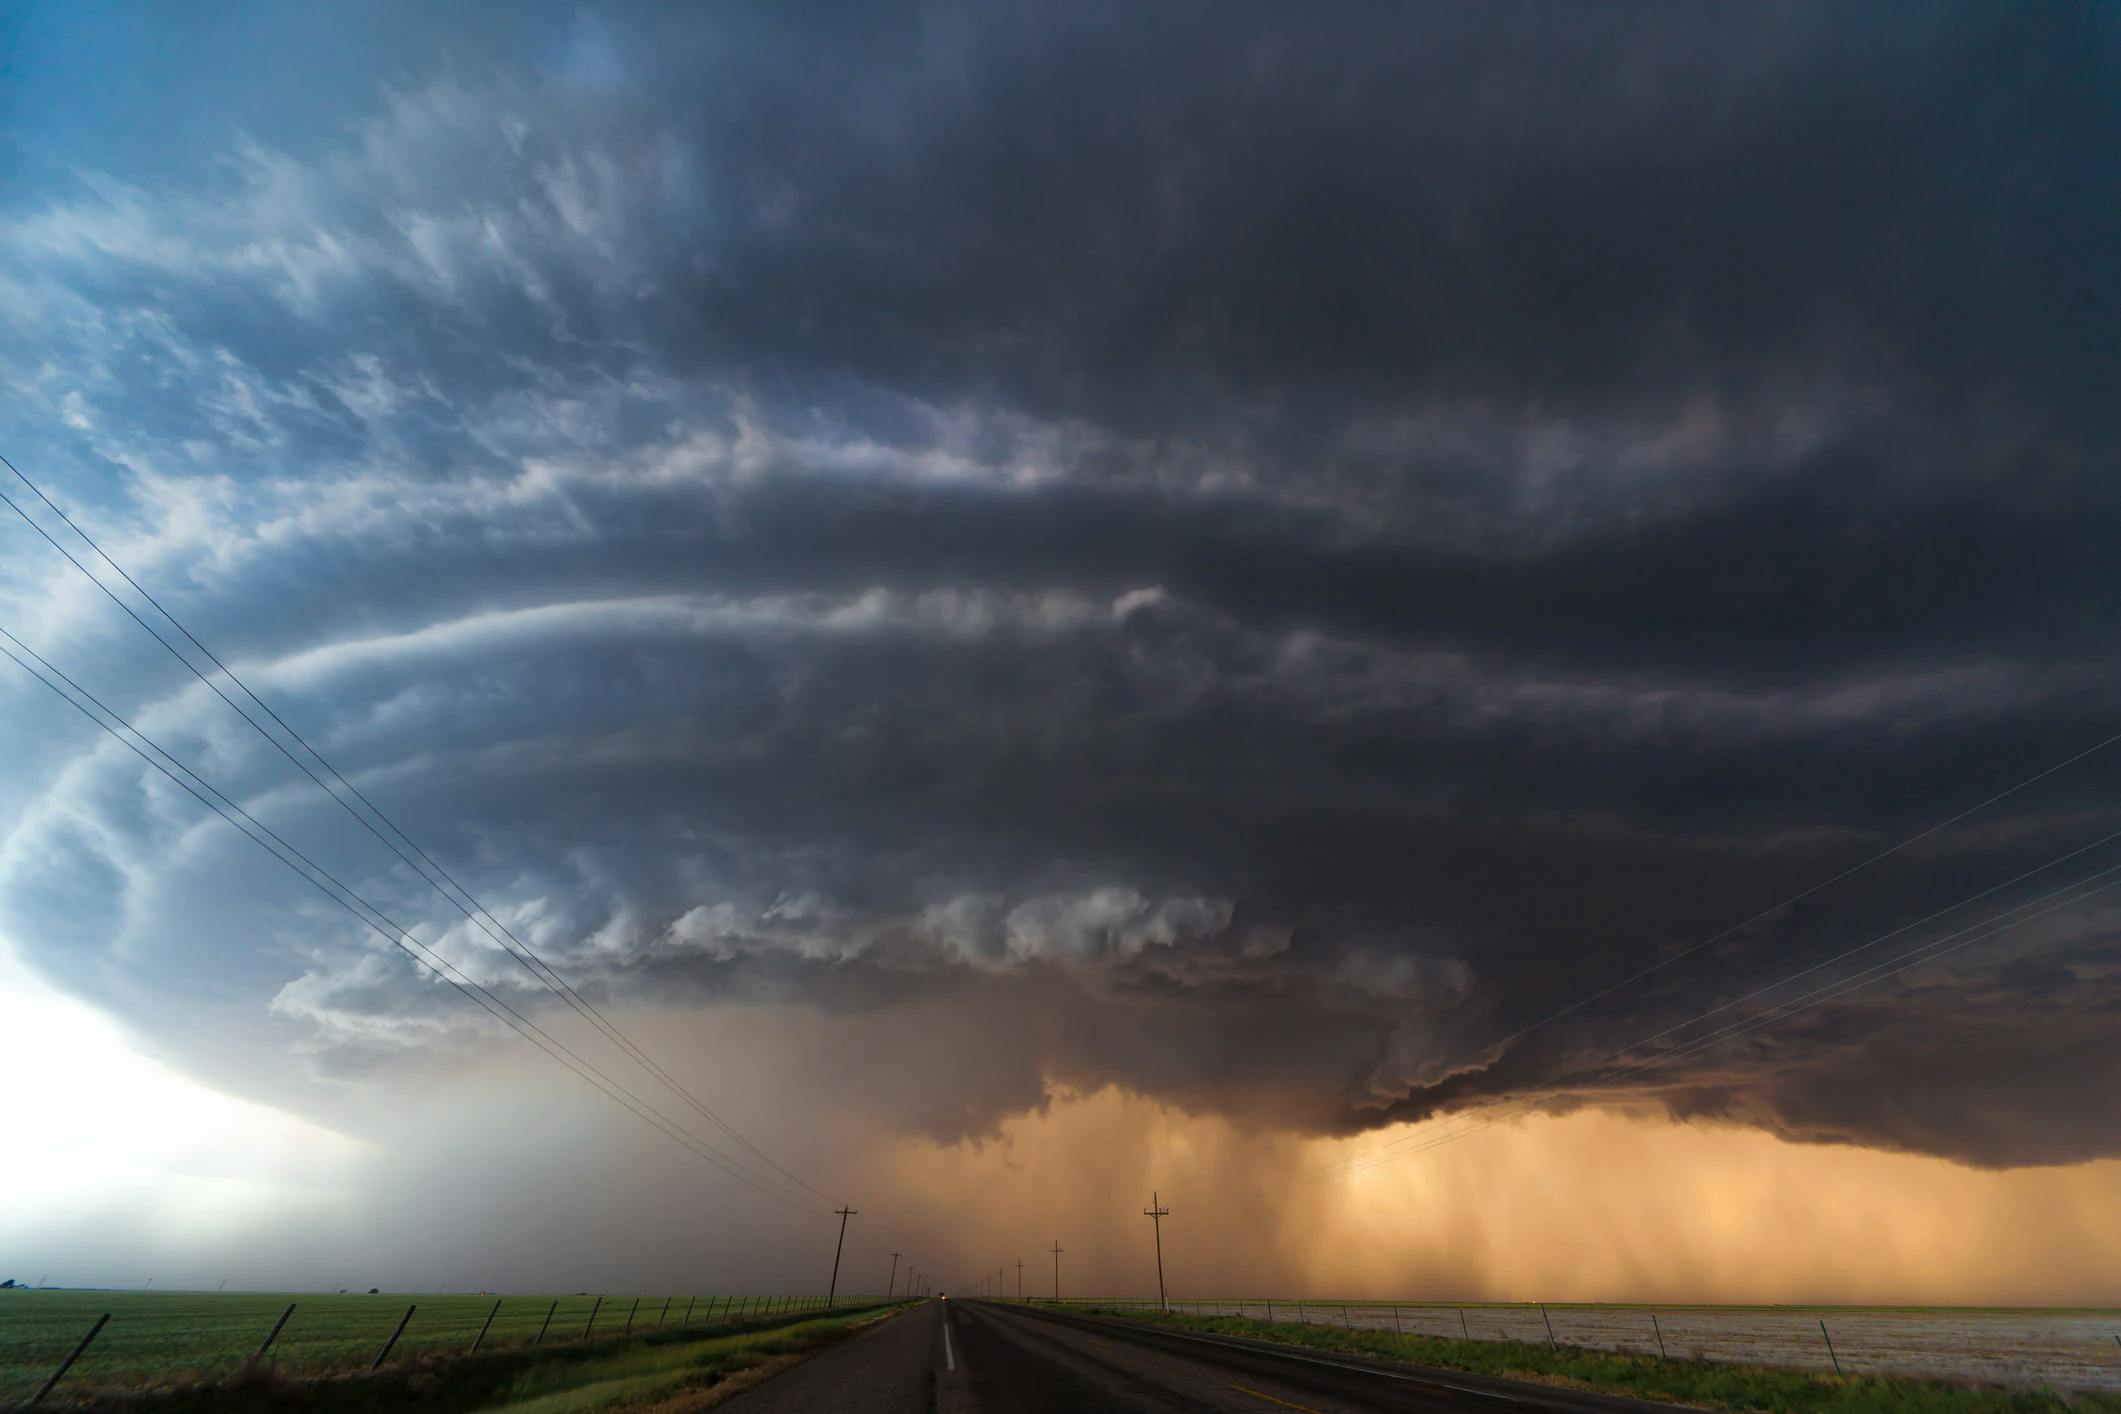 Tornadic supercell in the American Plains